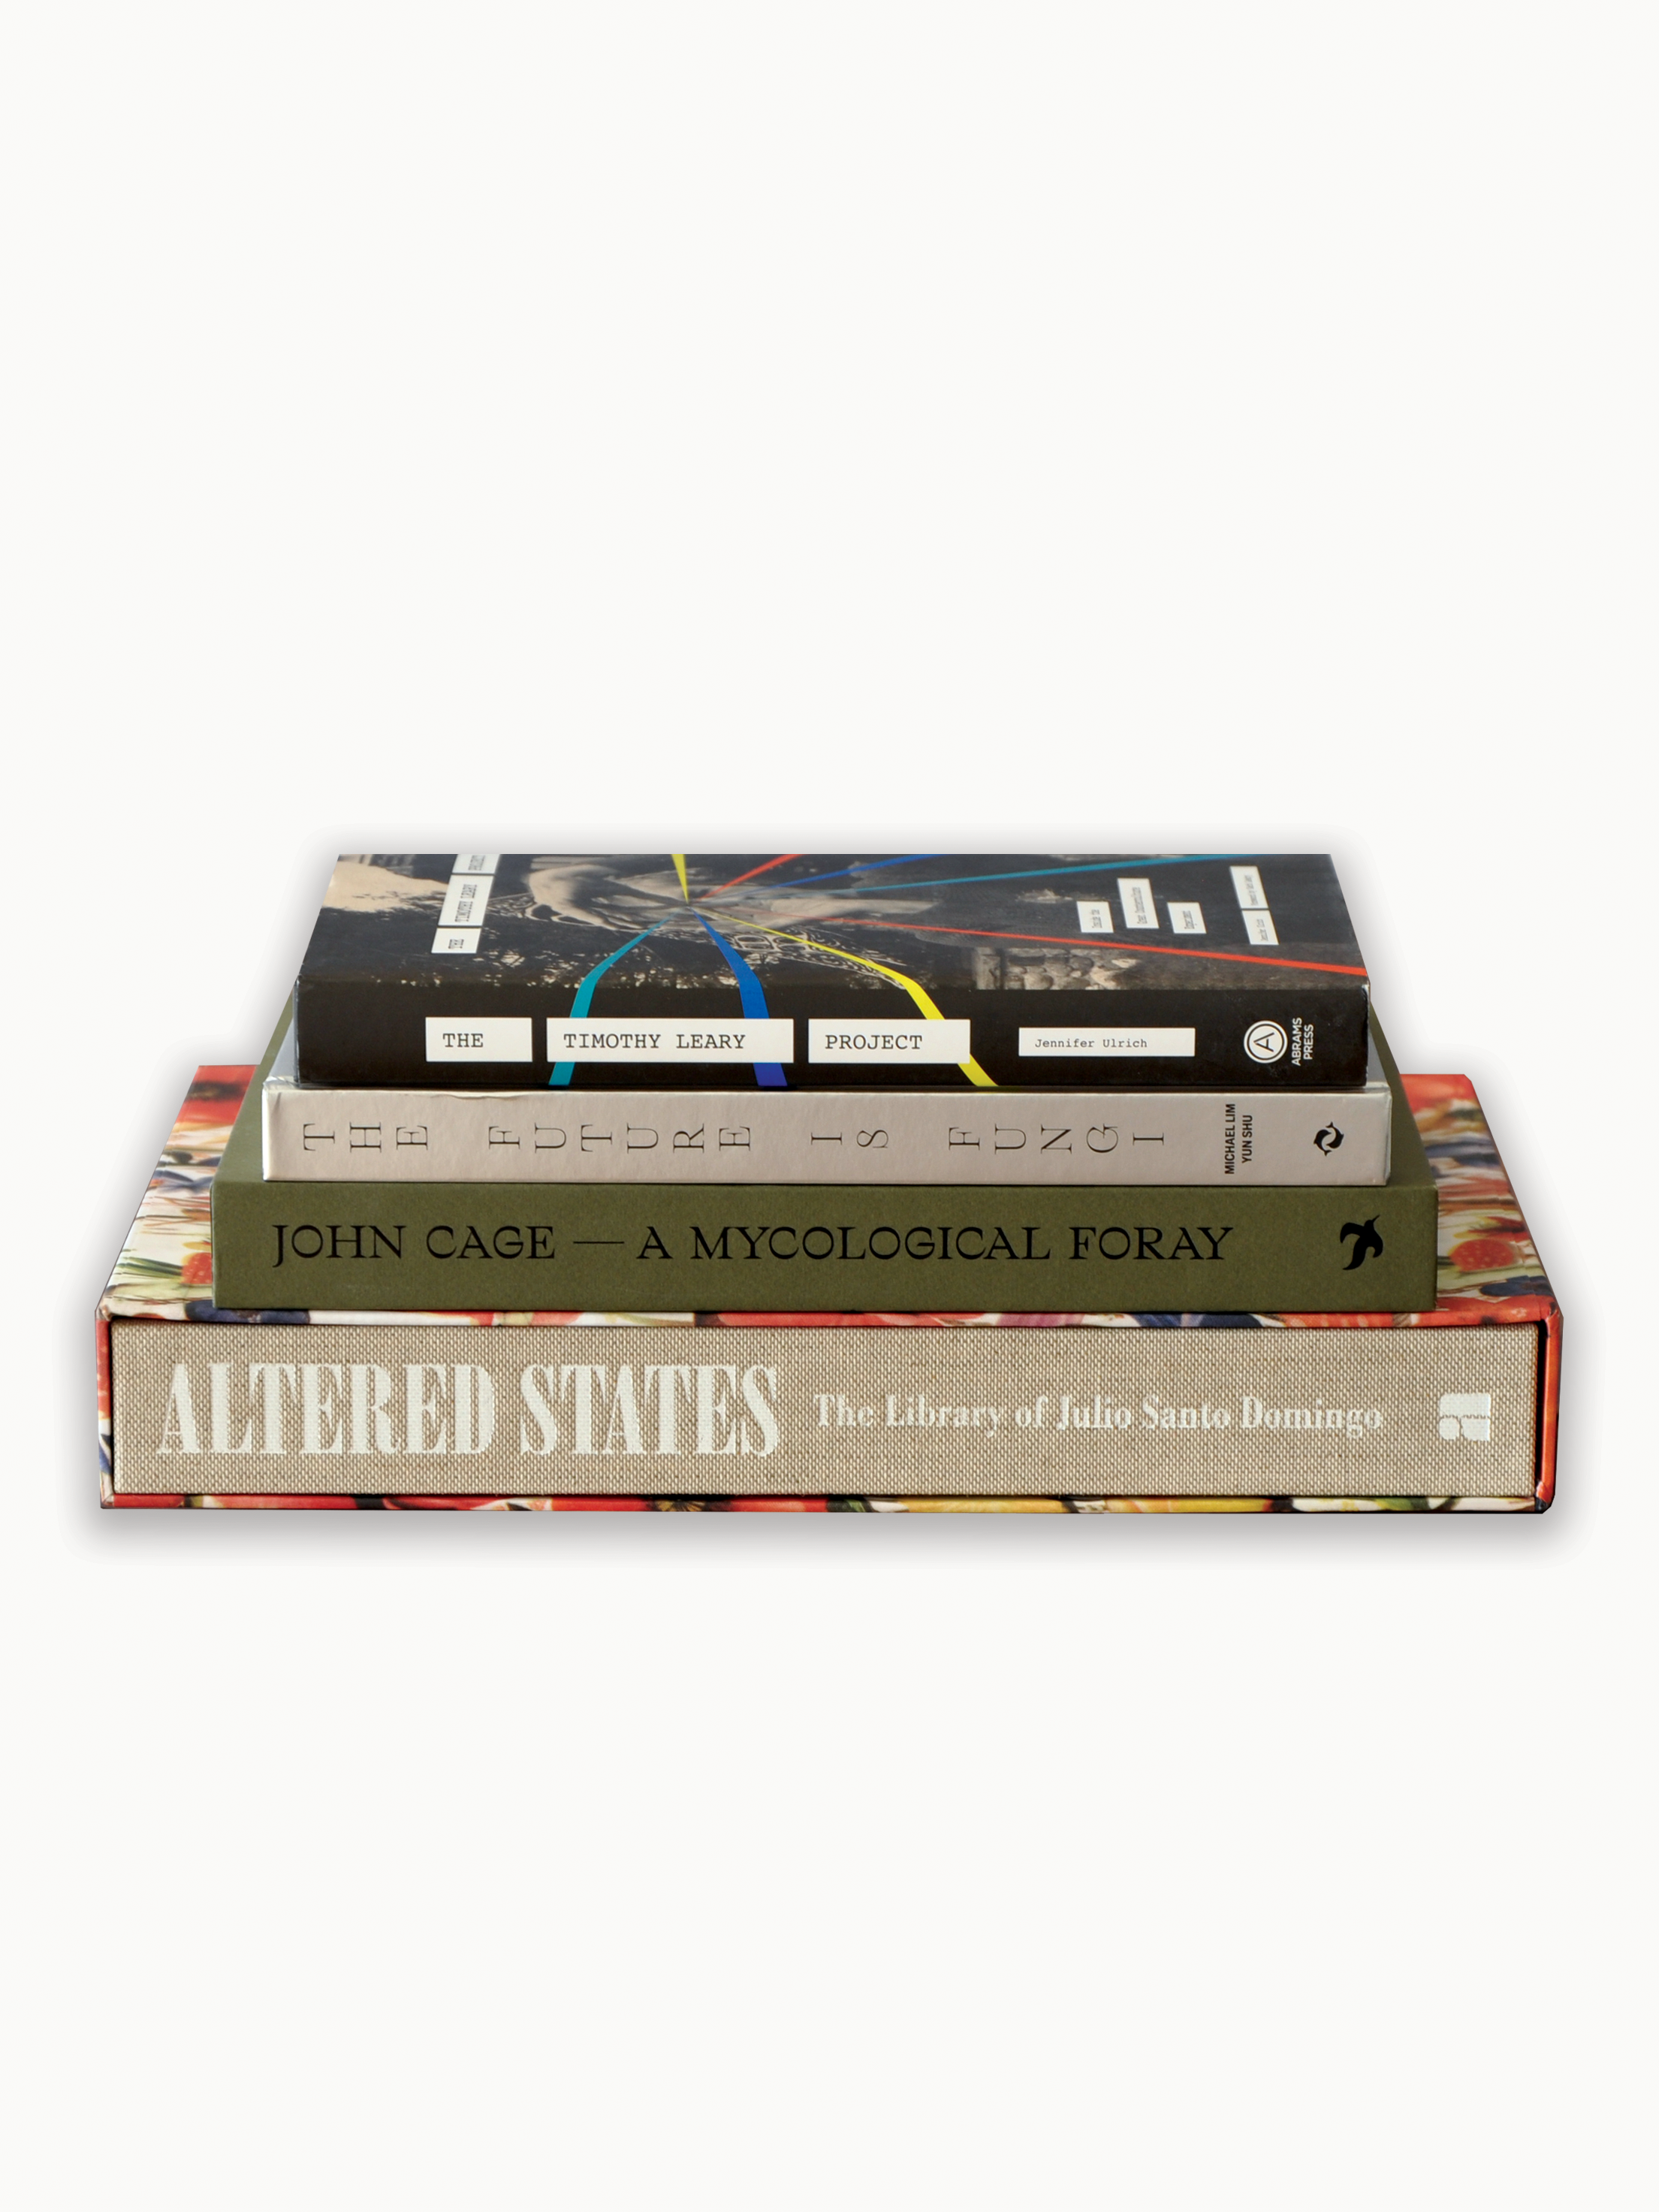 Best Coffee Table Books to Style Shelves | Charleston Blonde